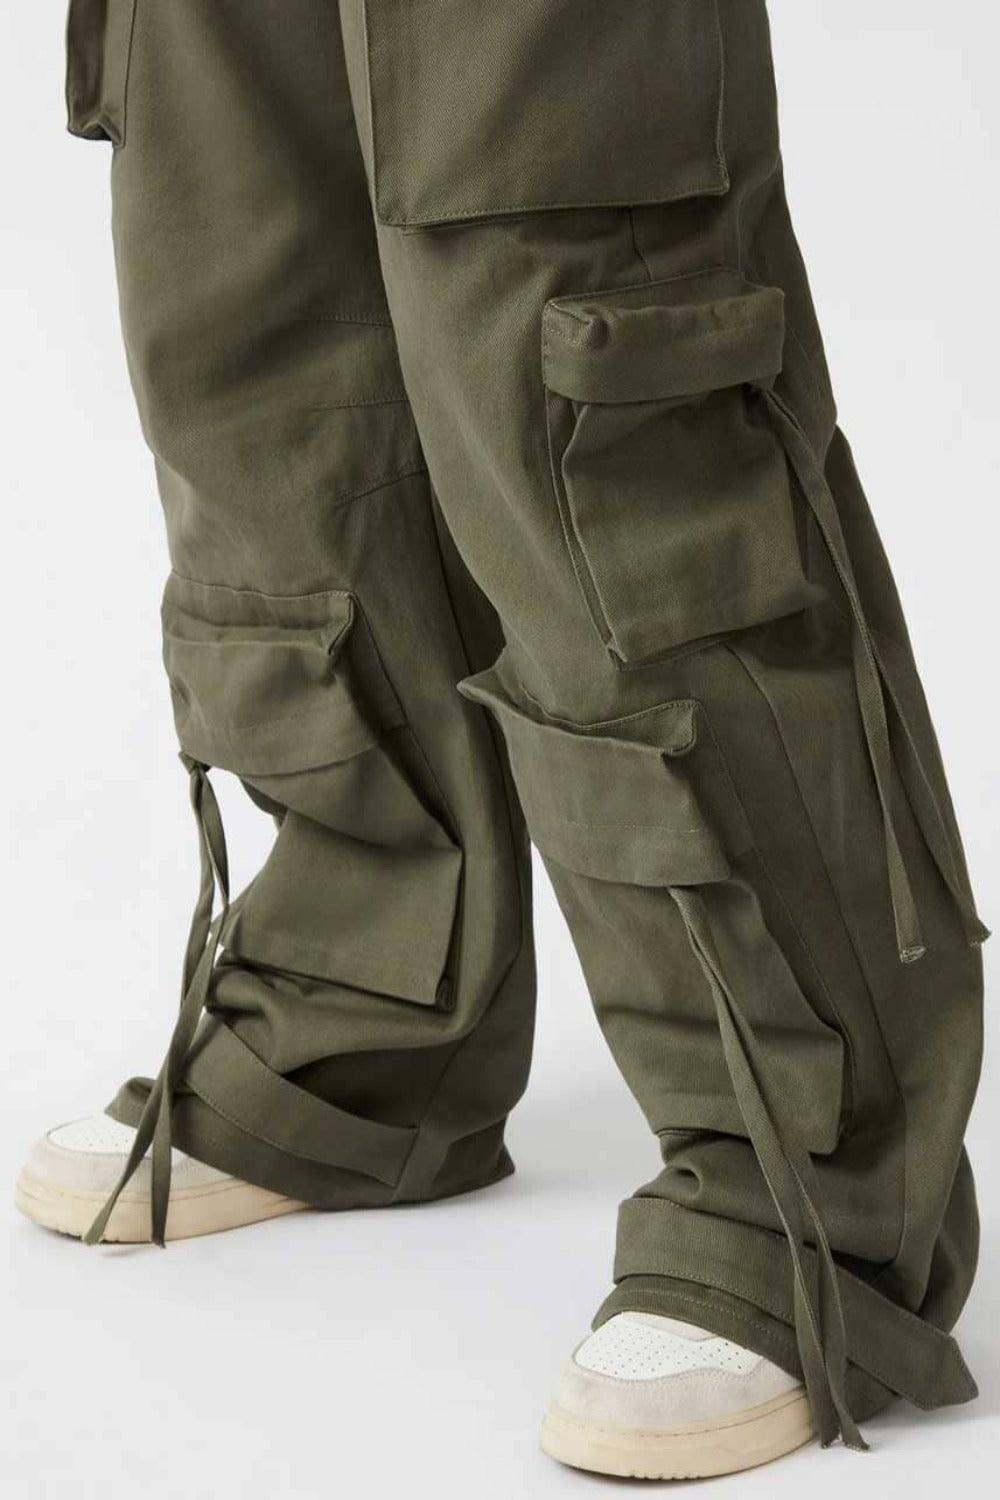 Duo Pant in Olive